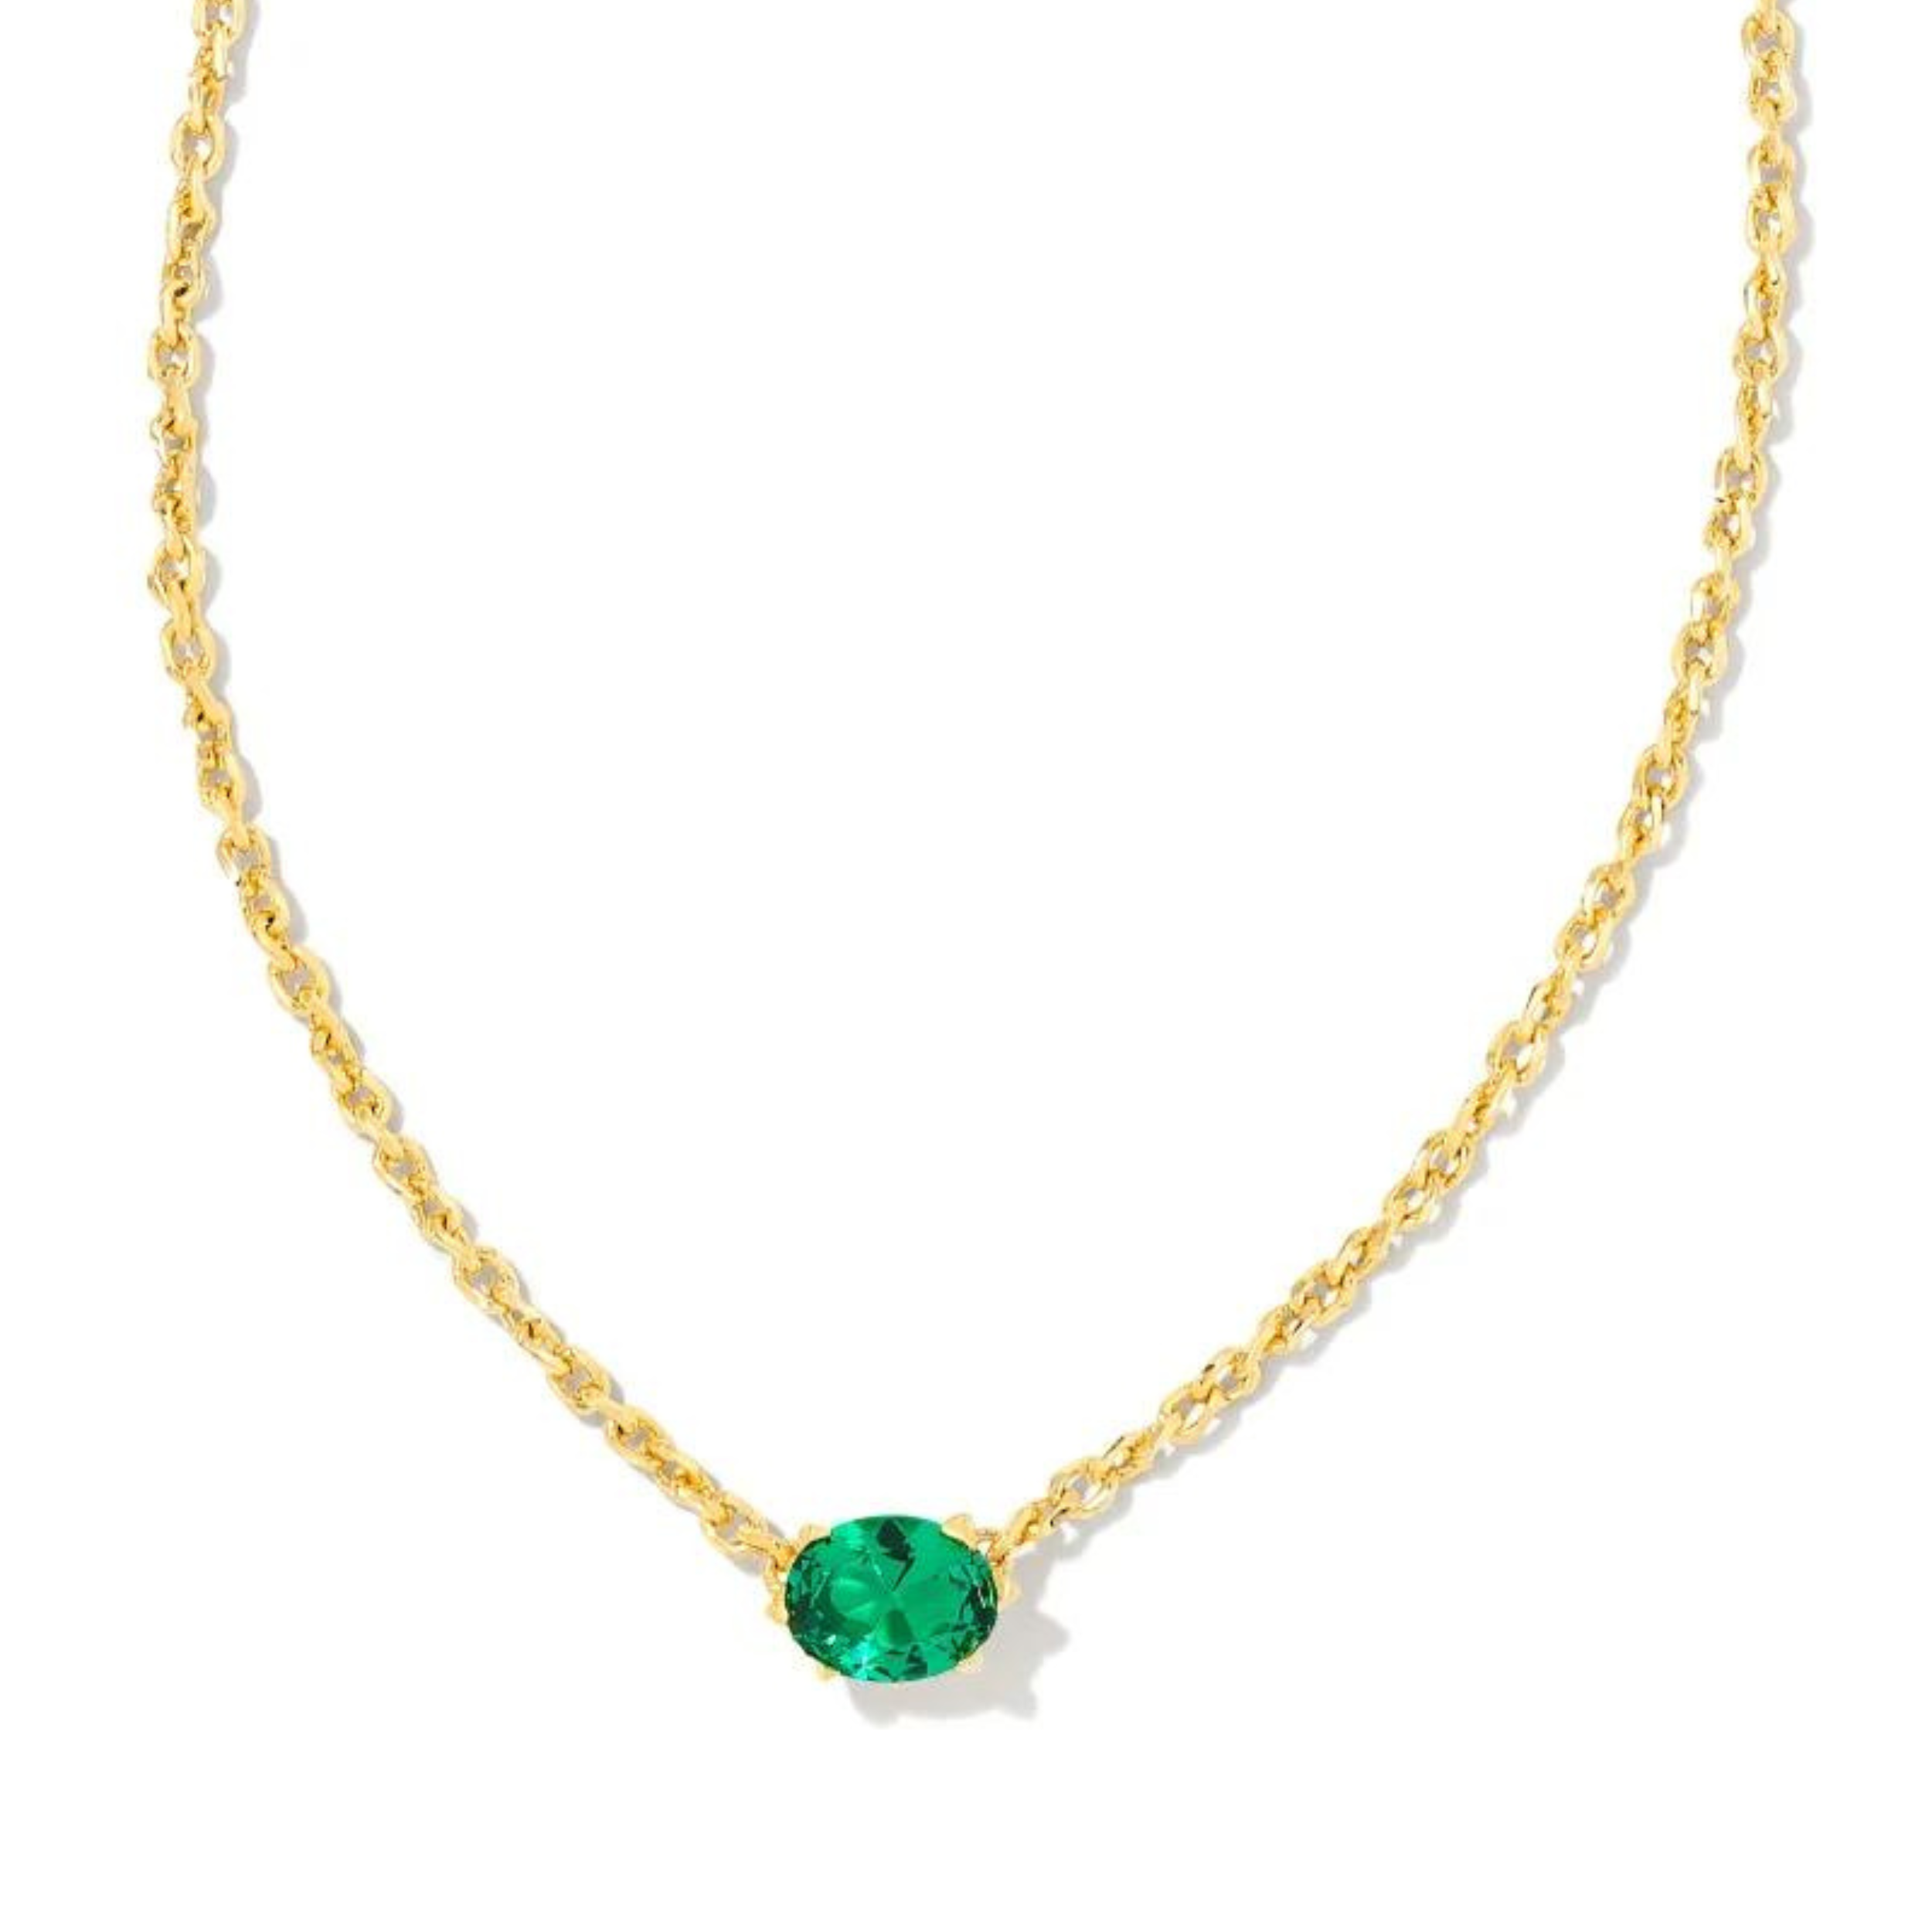 Gold chain necklace with a green crystal pendant, pictured on a white background.